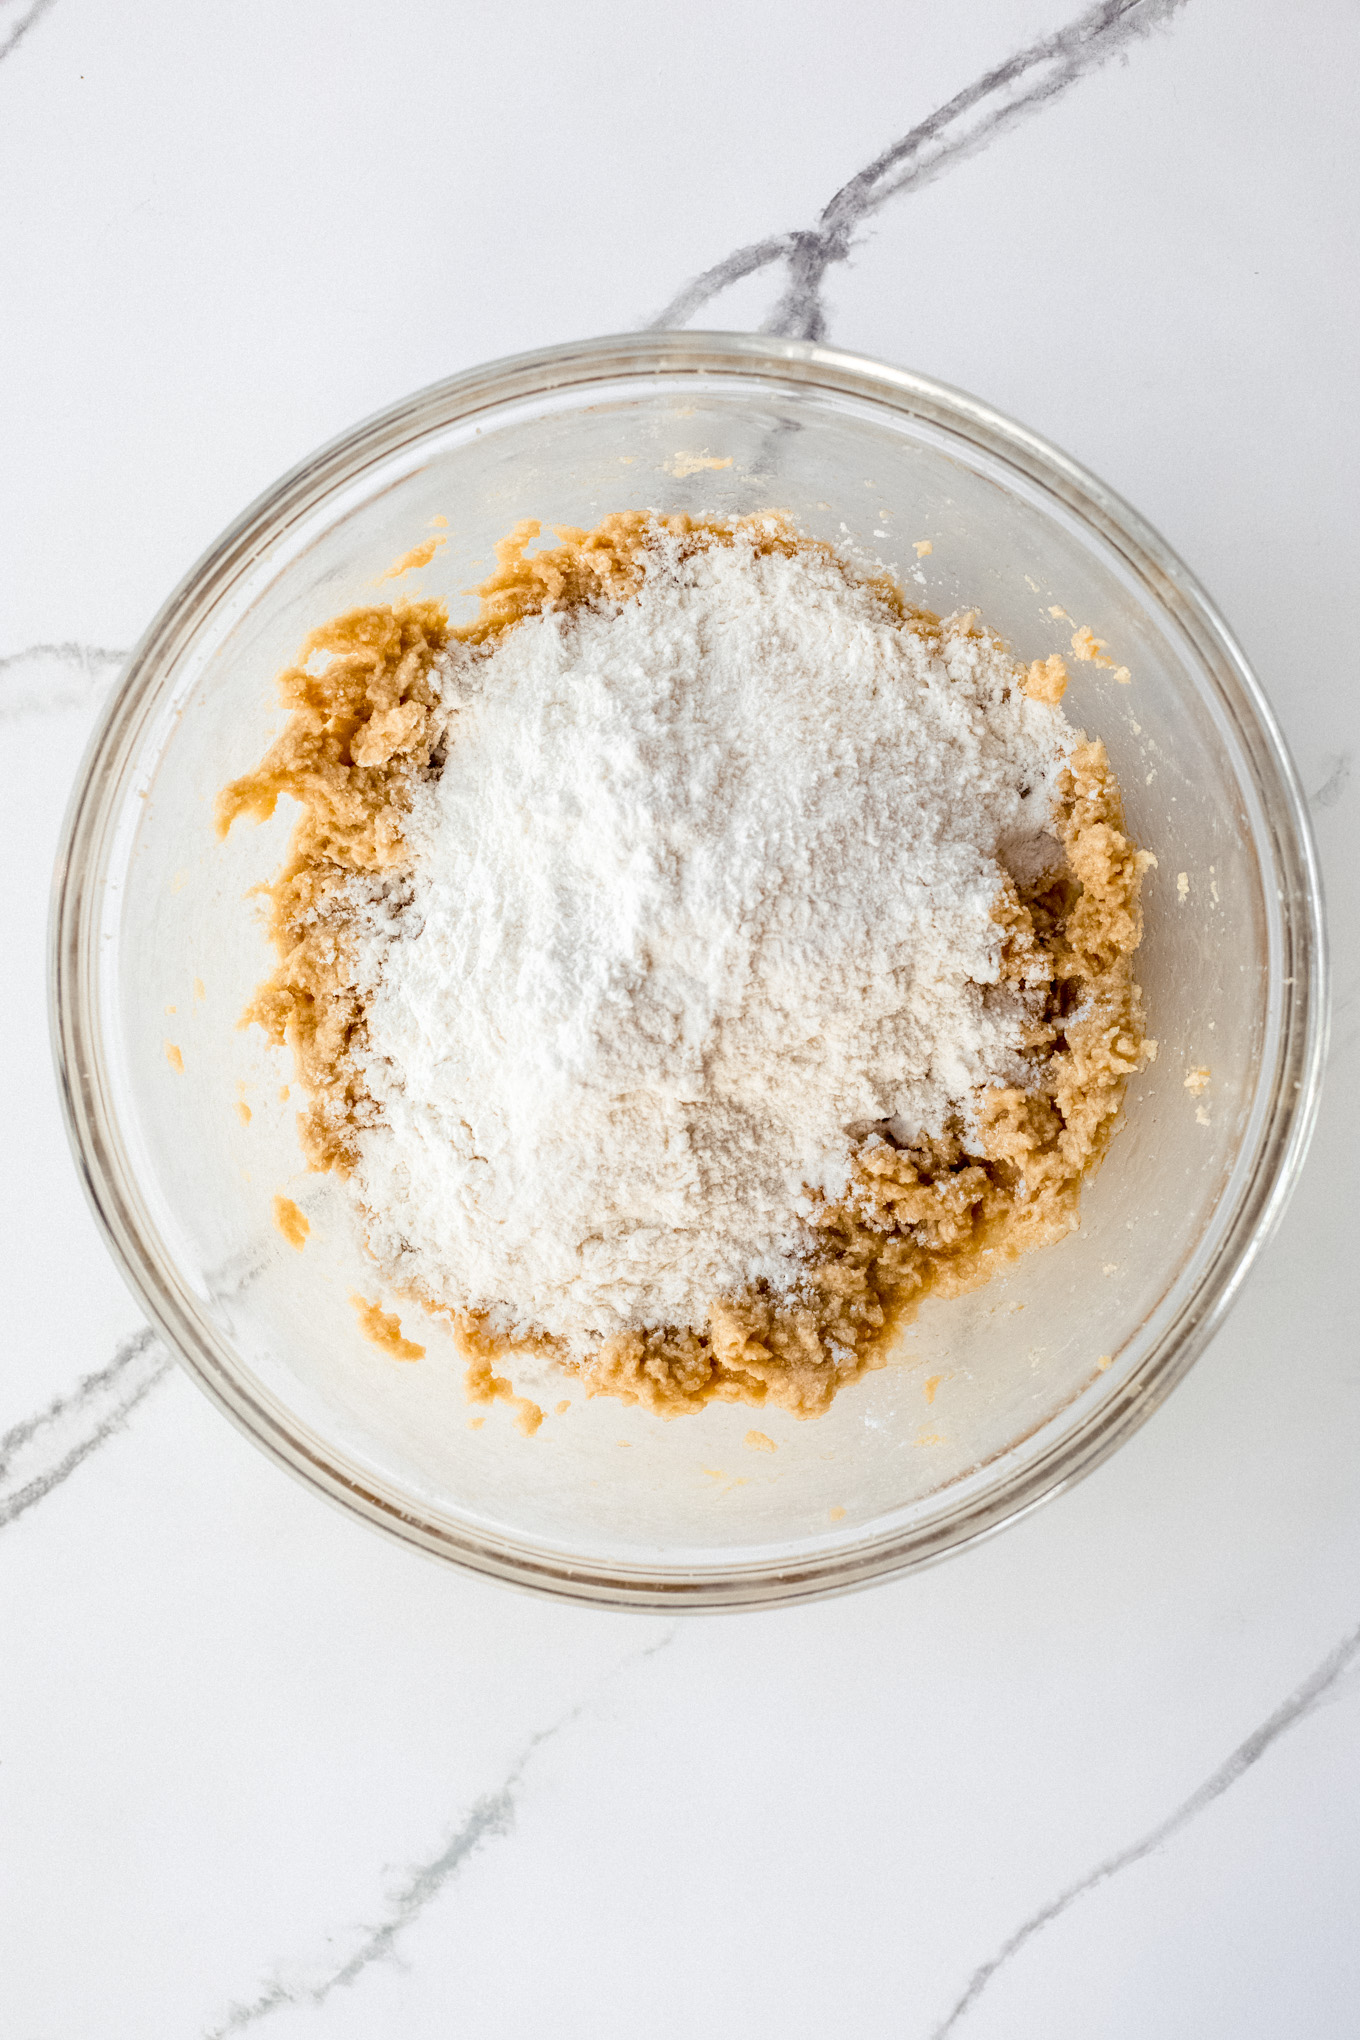 dry ingredients over wet ingredients in a glass bowl.